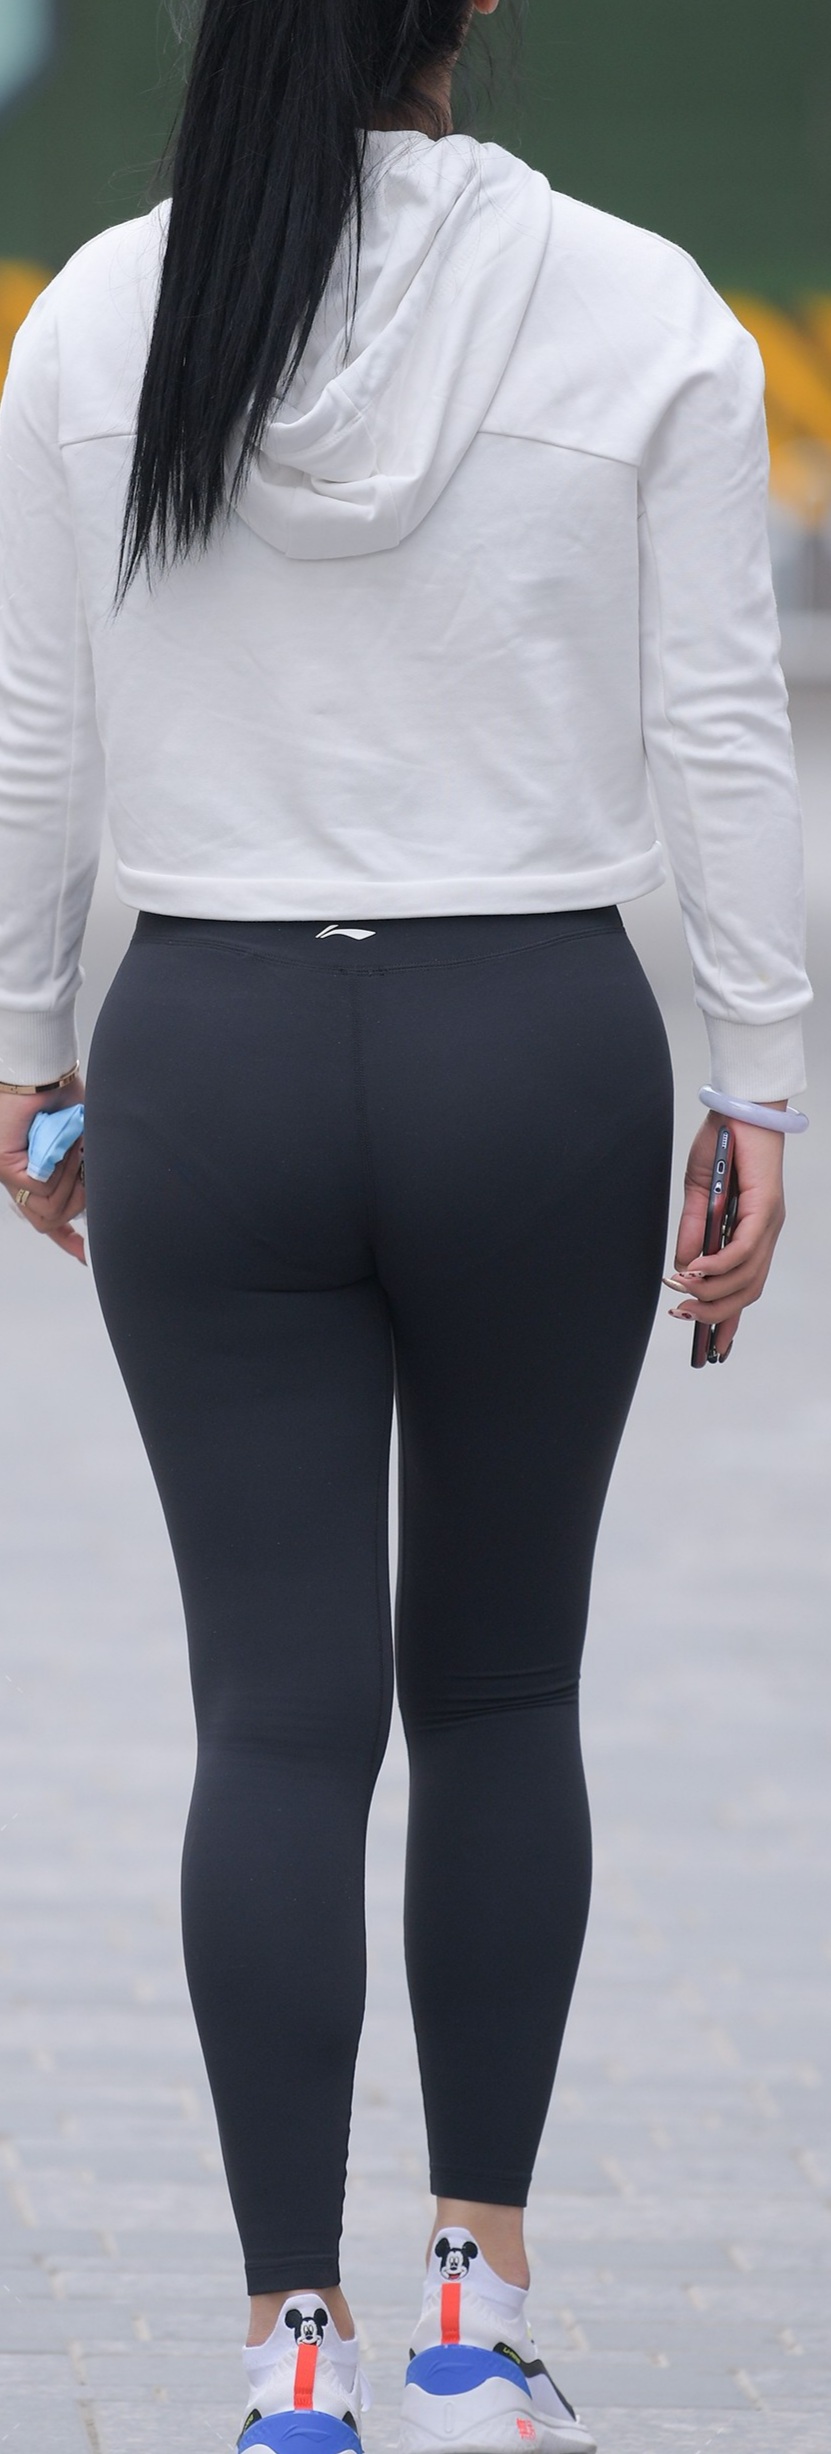 Decent booty with a cameltoe - Spandex, Leggings & Yoga Pants - Forum